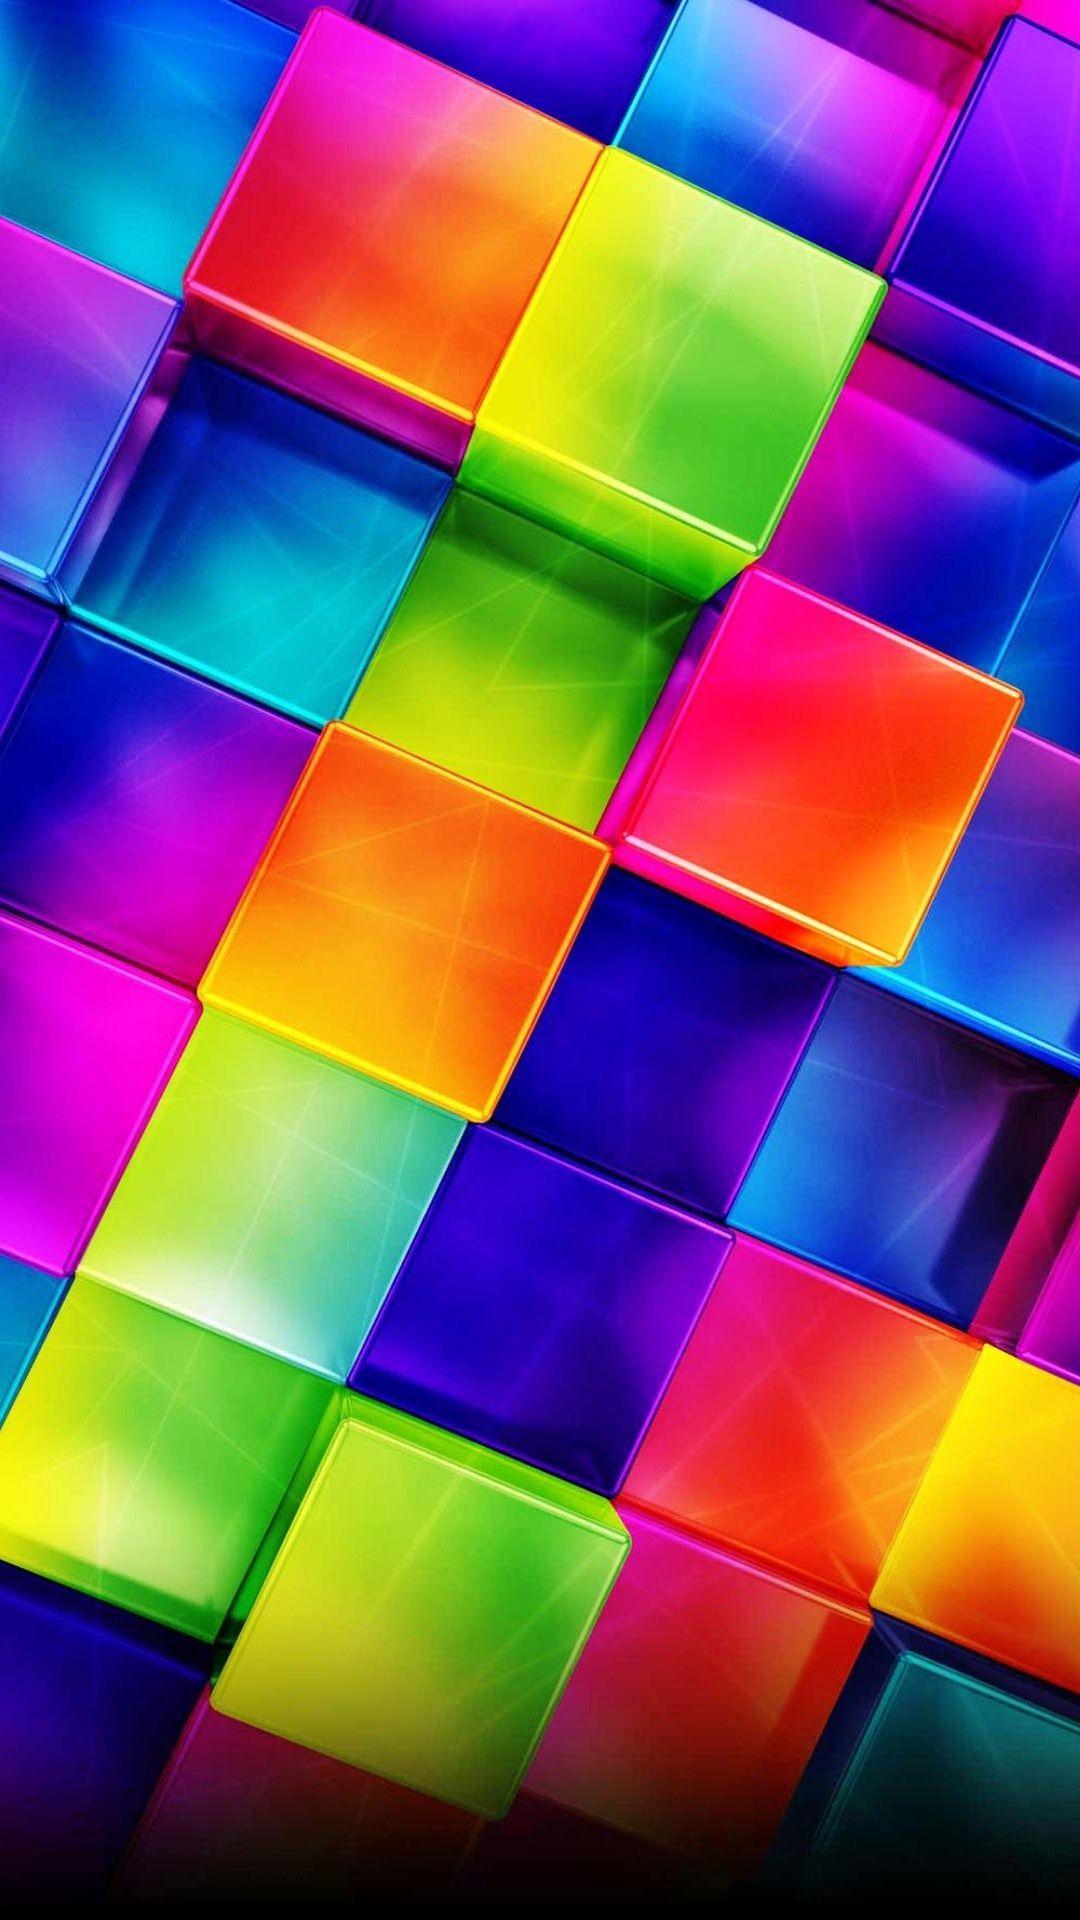 3D Geometric Colorful Android Wallpaper HD Wallpaper